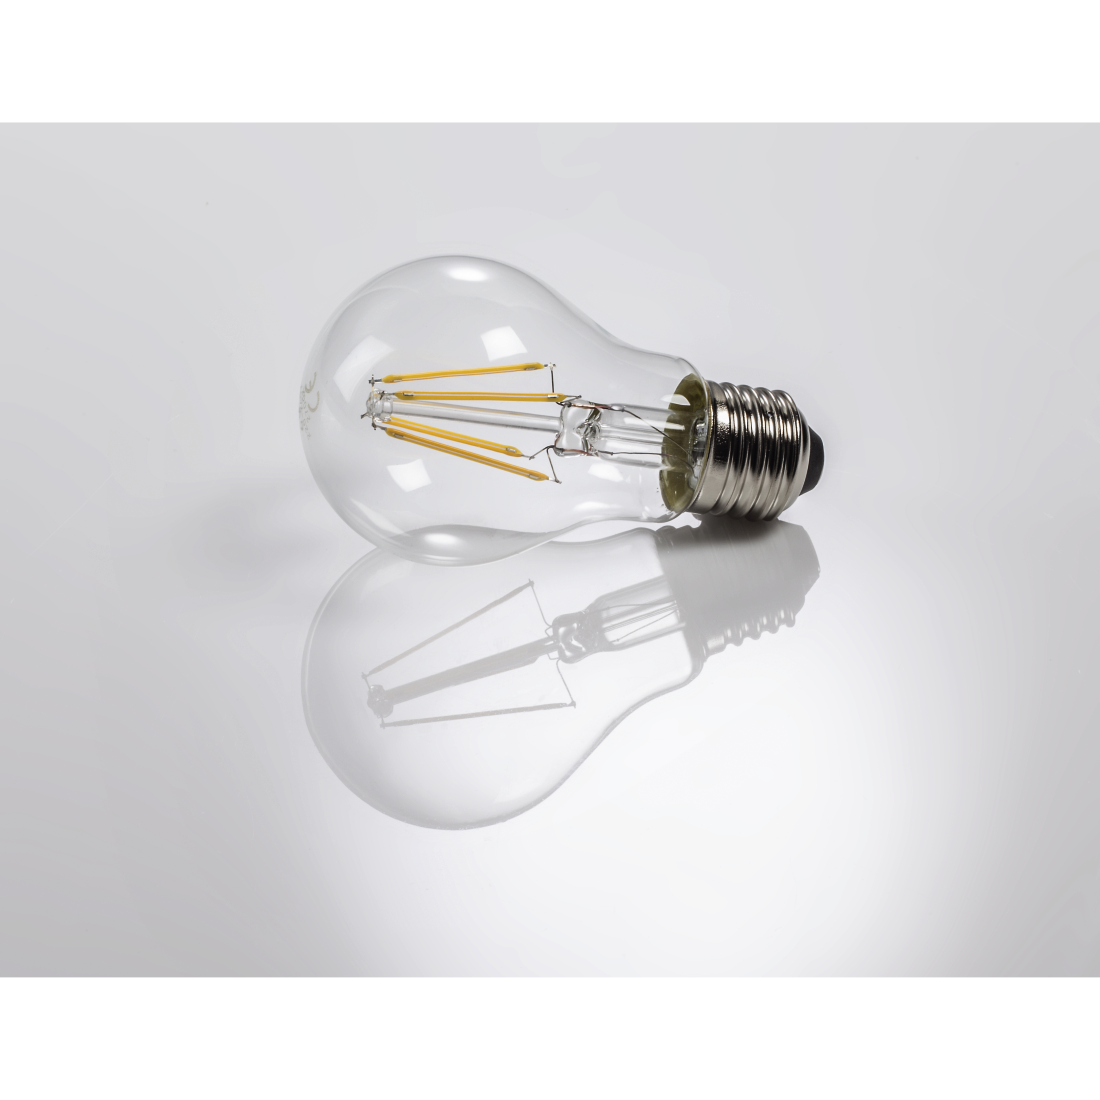 abx3 High-Res Image 3 - Xavax, LED Filament, E27, 810lm replaces 60W, incandescent bulb, warm white